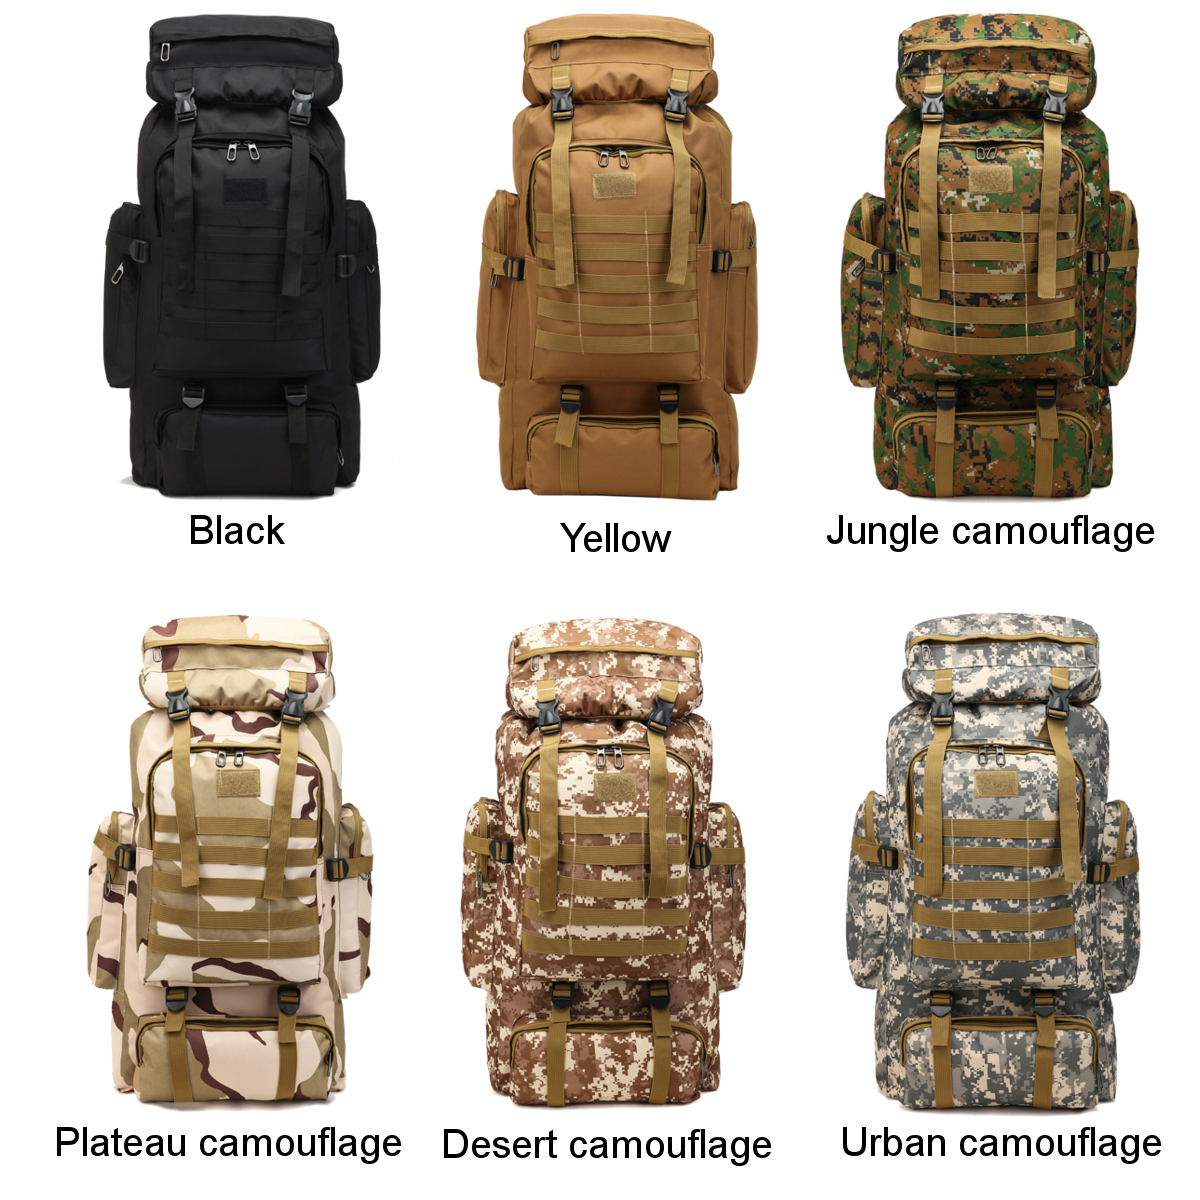 Military Tactical Backpack Novashion 80L Large Capacity Camping Hiking Backpack Rucksack Waterproof Traveling Daypack for Outdoor, Gift for Boy and Girl - image 2 of 4